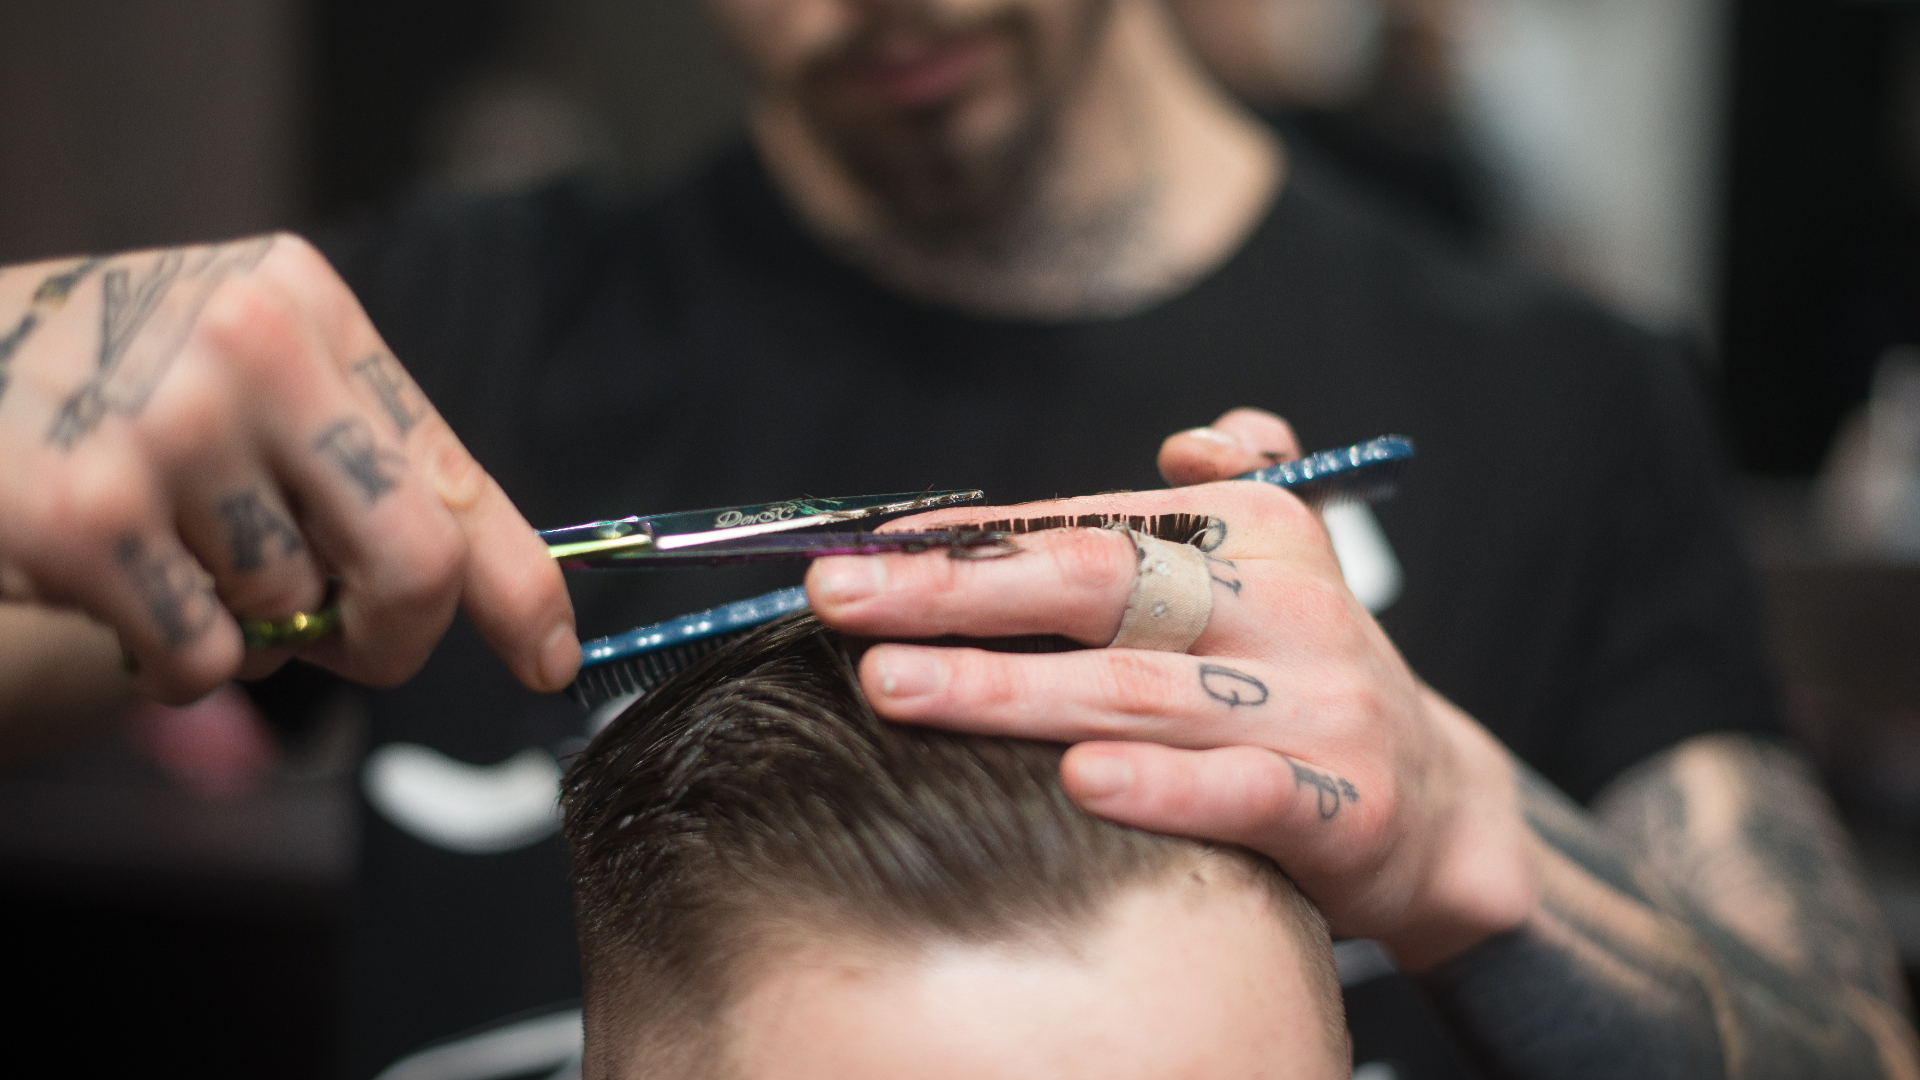 The 8 Best Haircuts For Men With Straight Hair